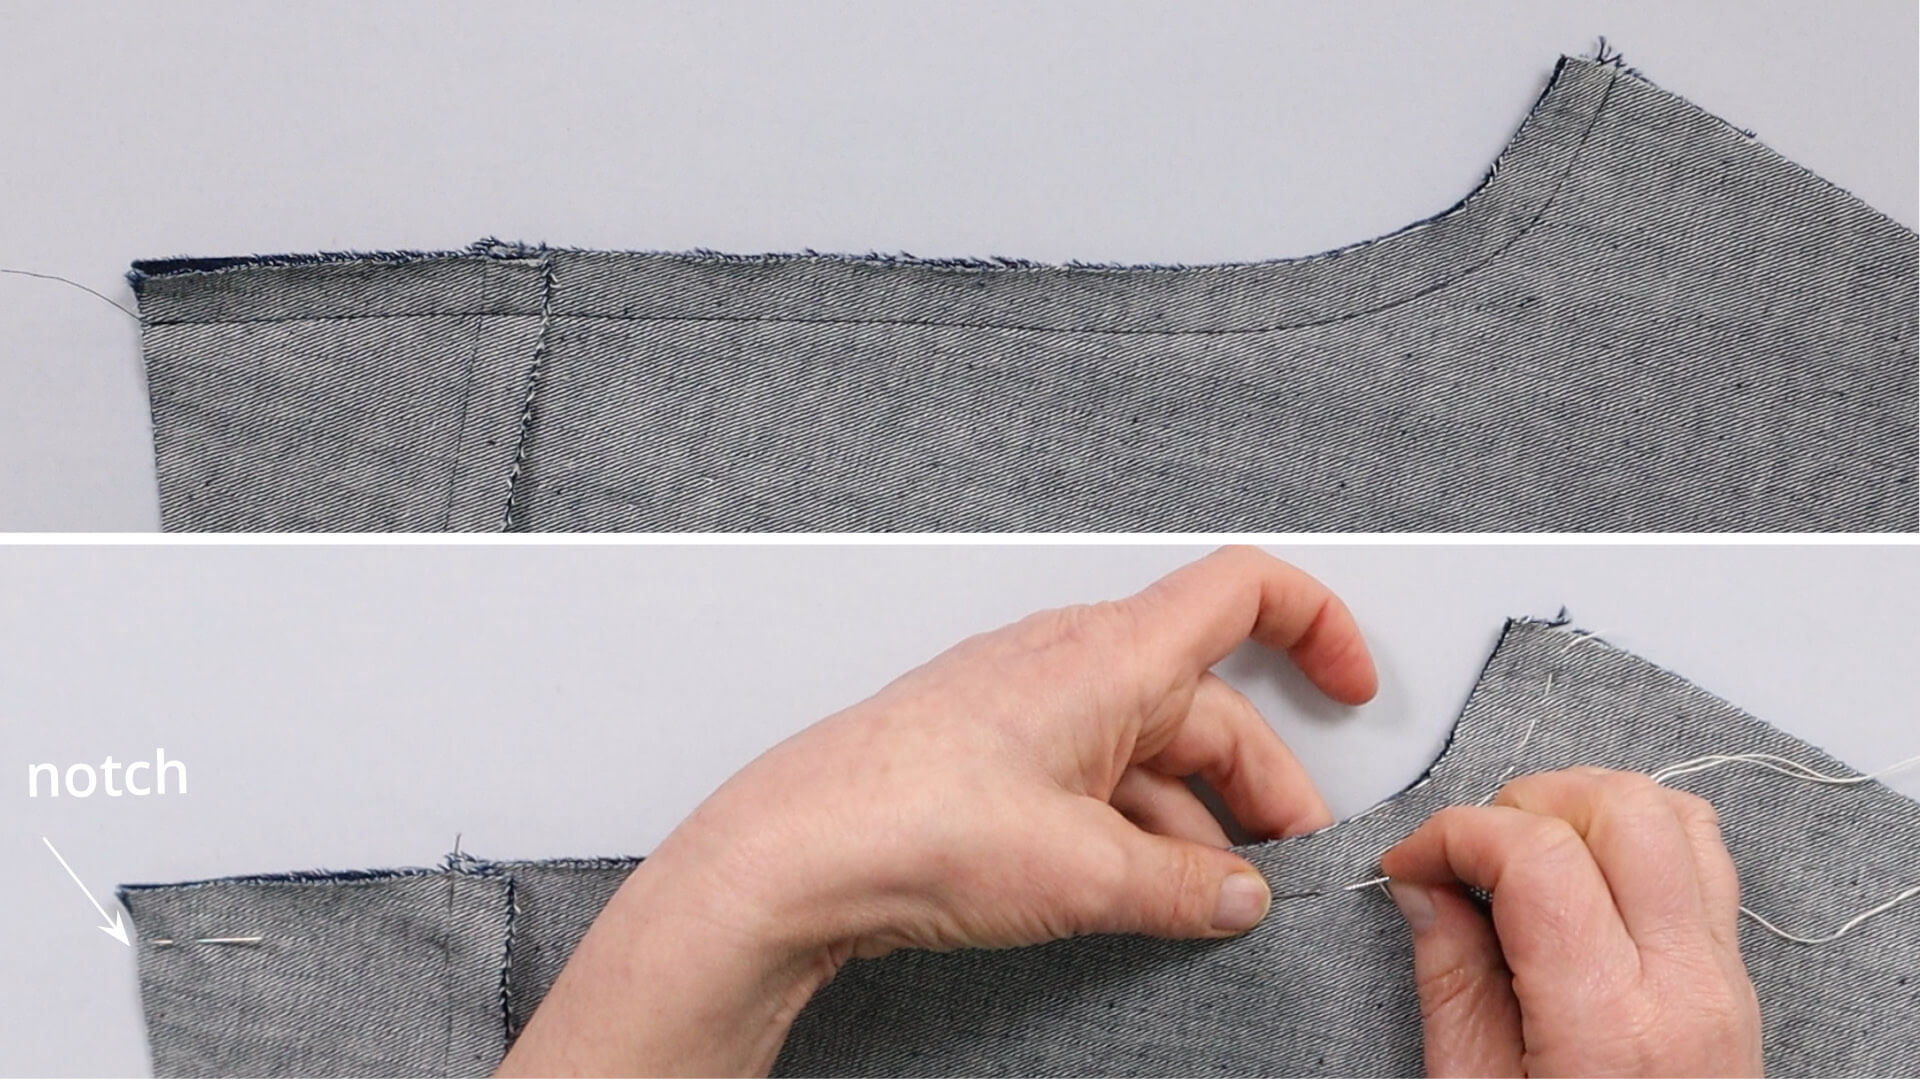 smartPATTERN sewing instructions for preparing a pair of denim trousers for fitting - Tack the back seat seam together